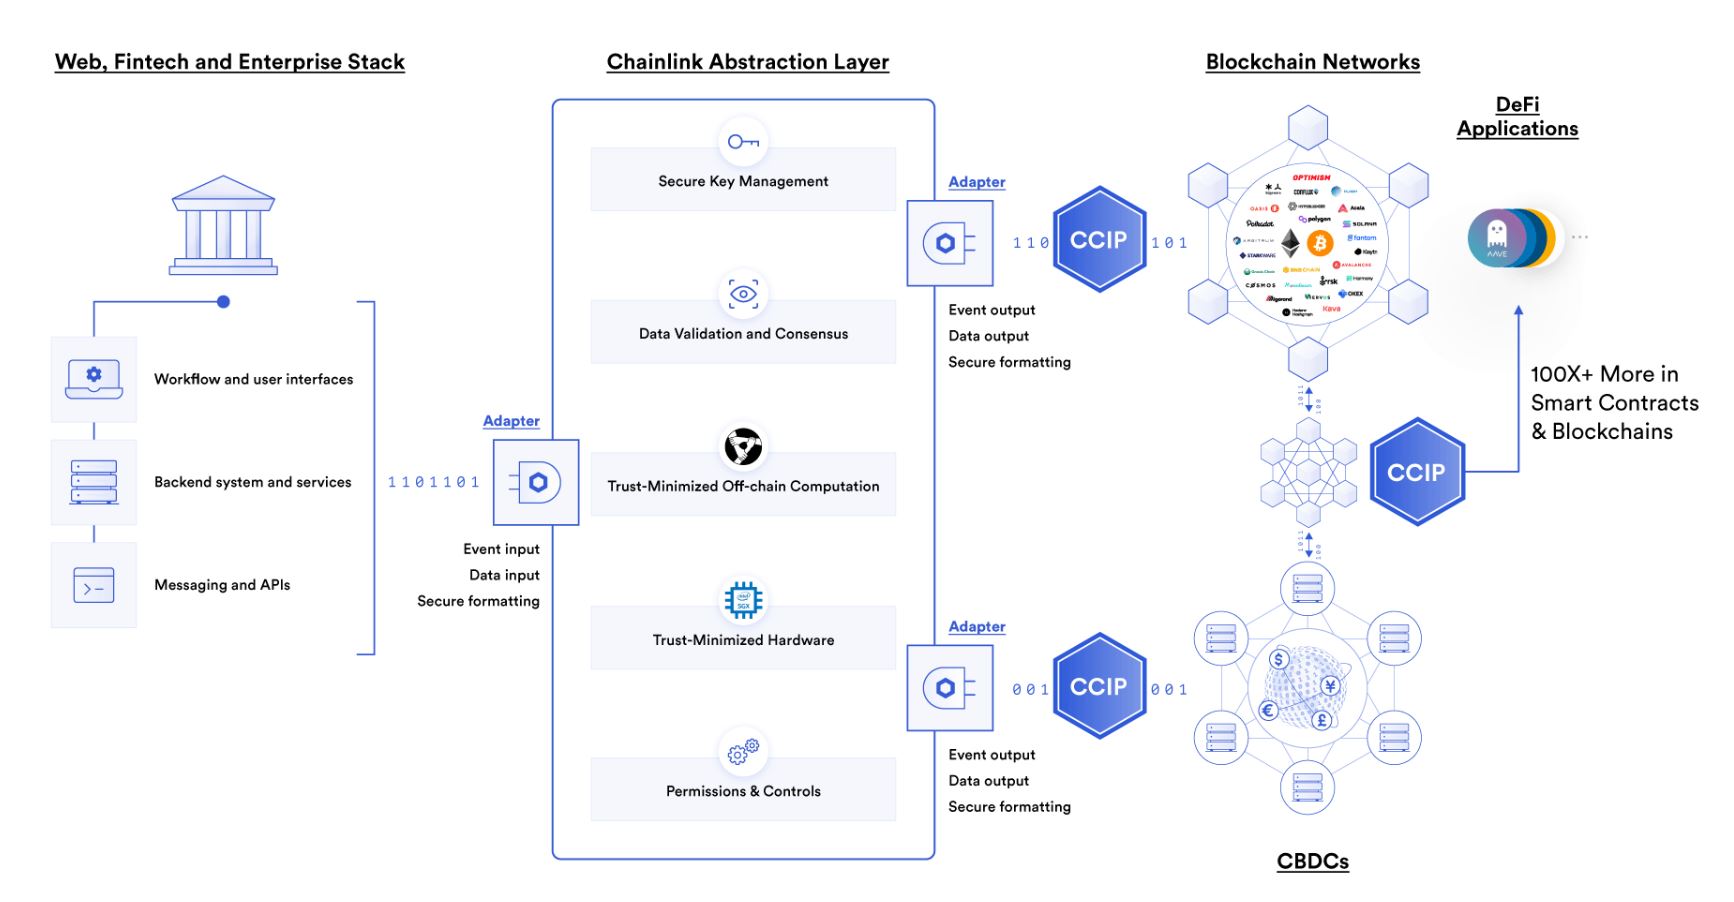 Chainlink usecases